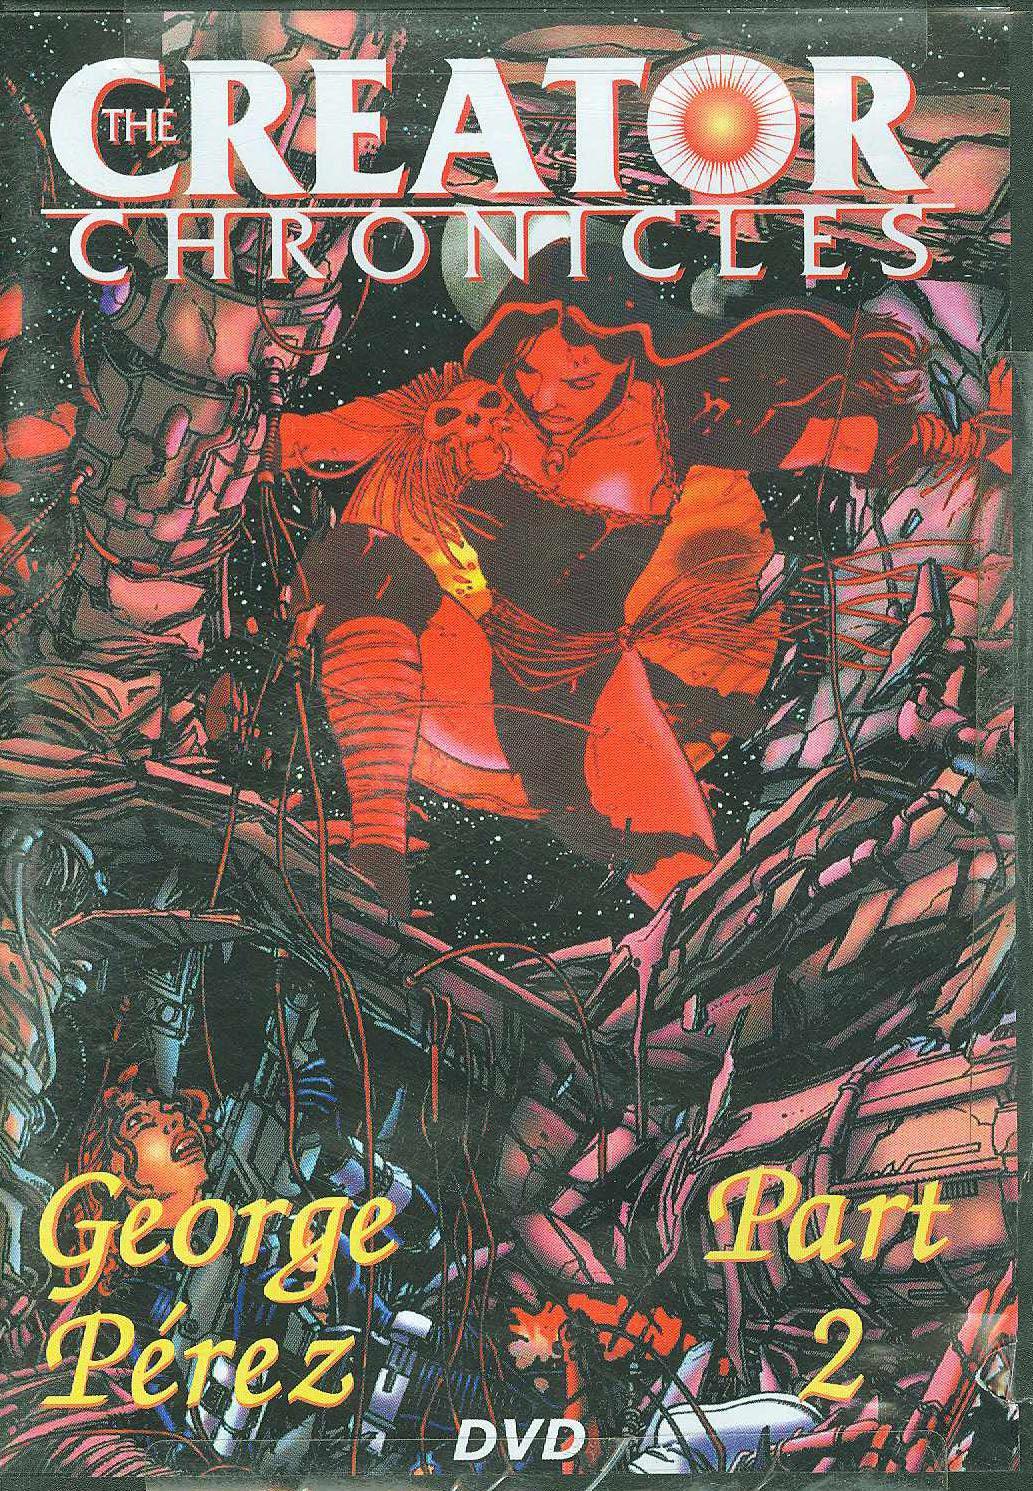 CREATOR CHRONICLES GEORGE PEREZ DVD VOL 2 SIGNED/NUMBERED - Kings Comics